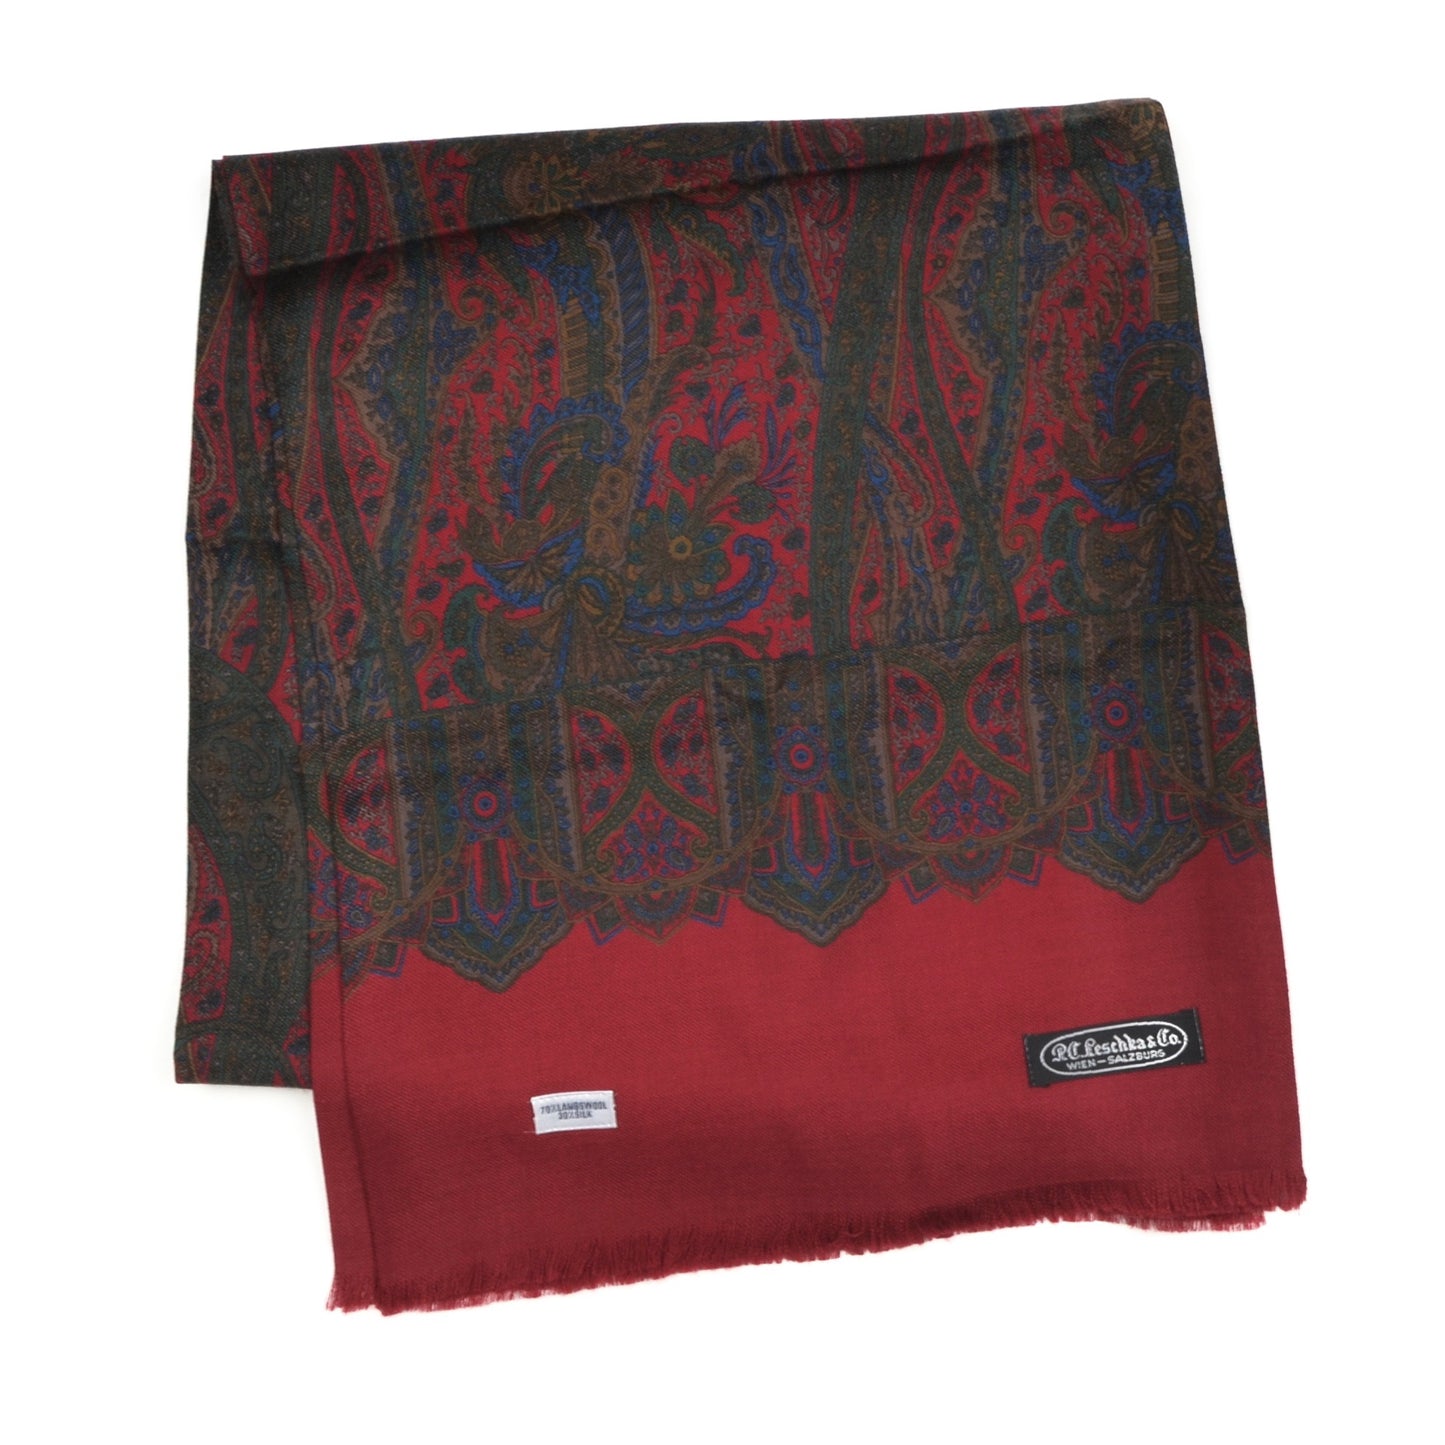 Wool & Silk Challis Floral Paisley Dress Scarf by P.C. Leschka - Red